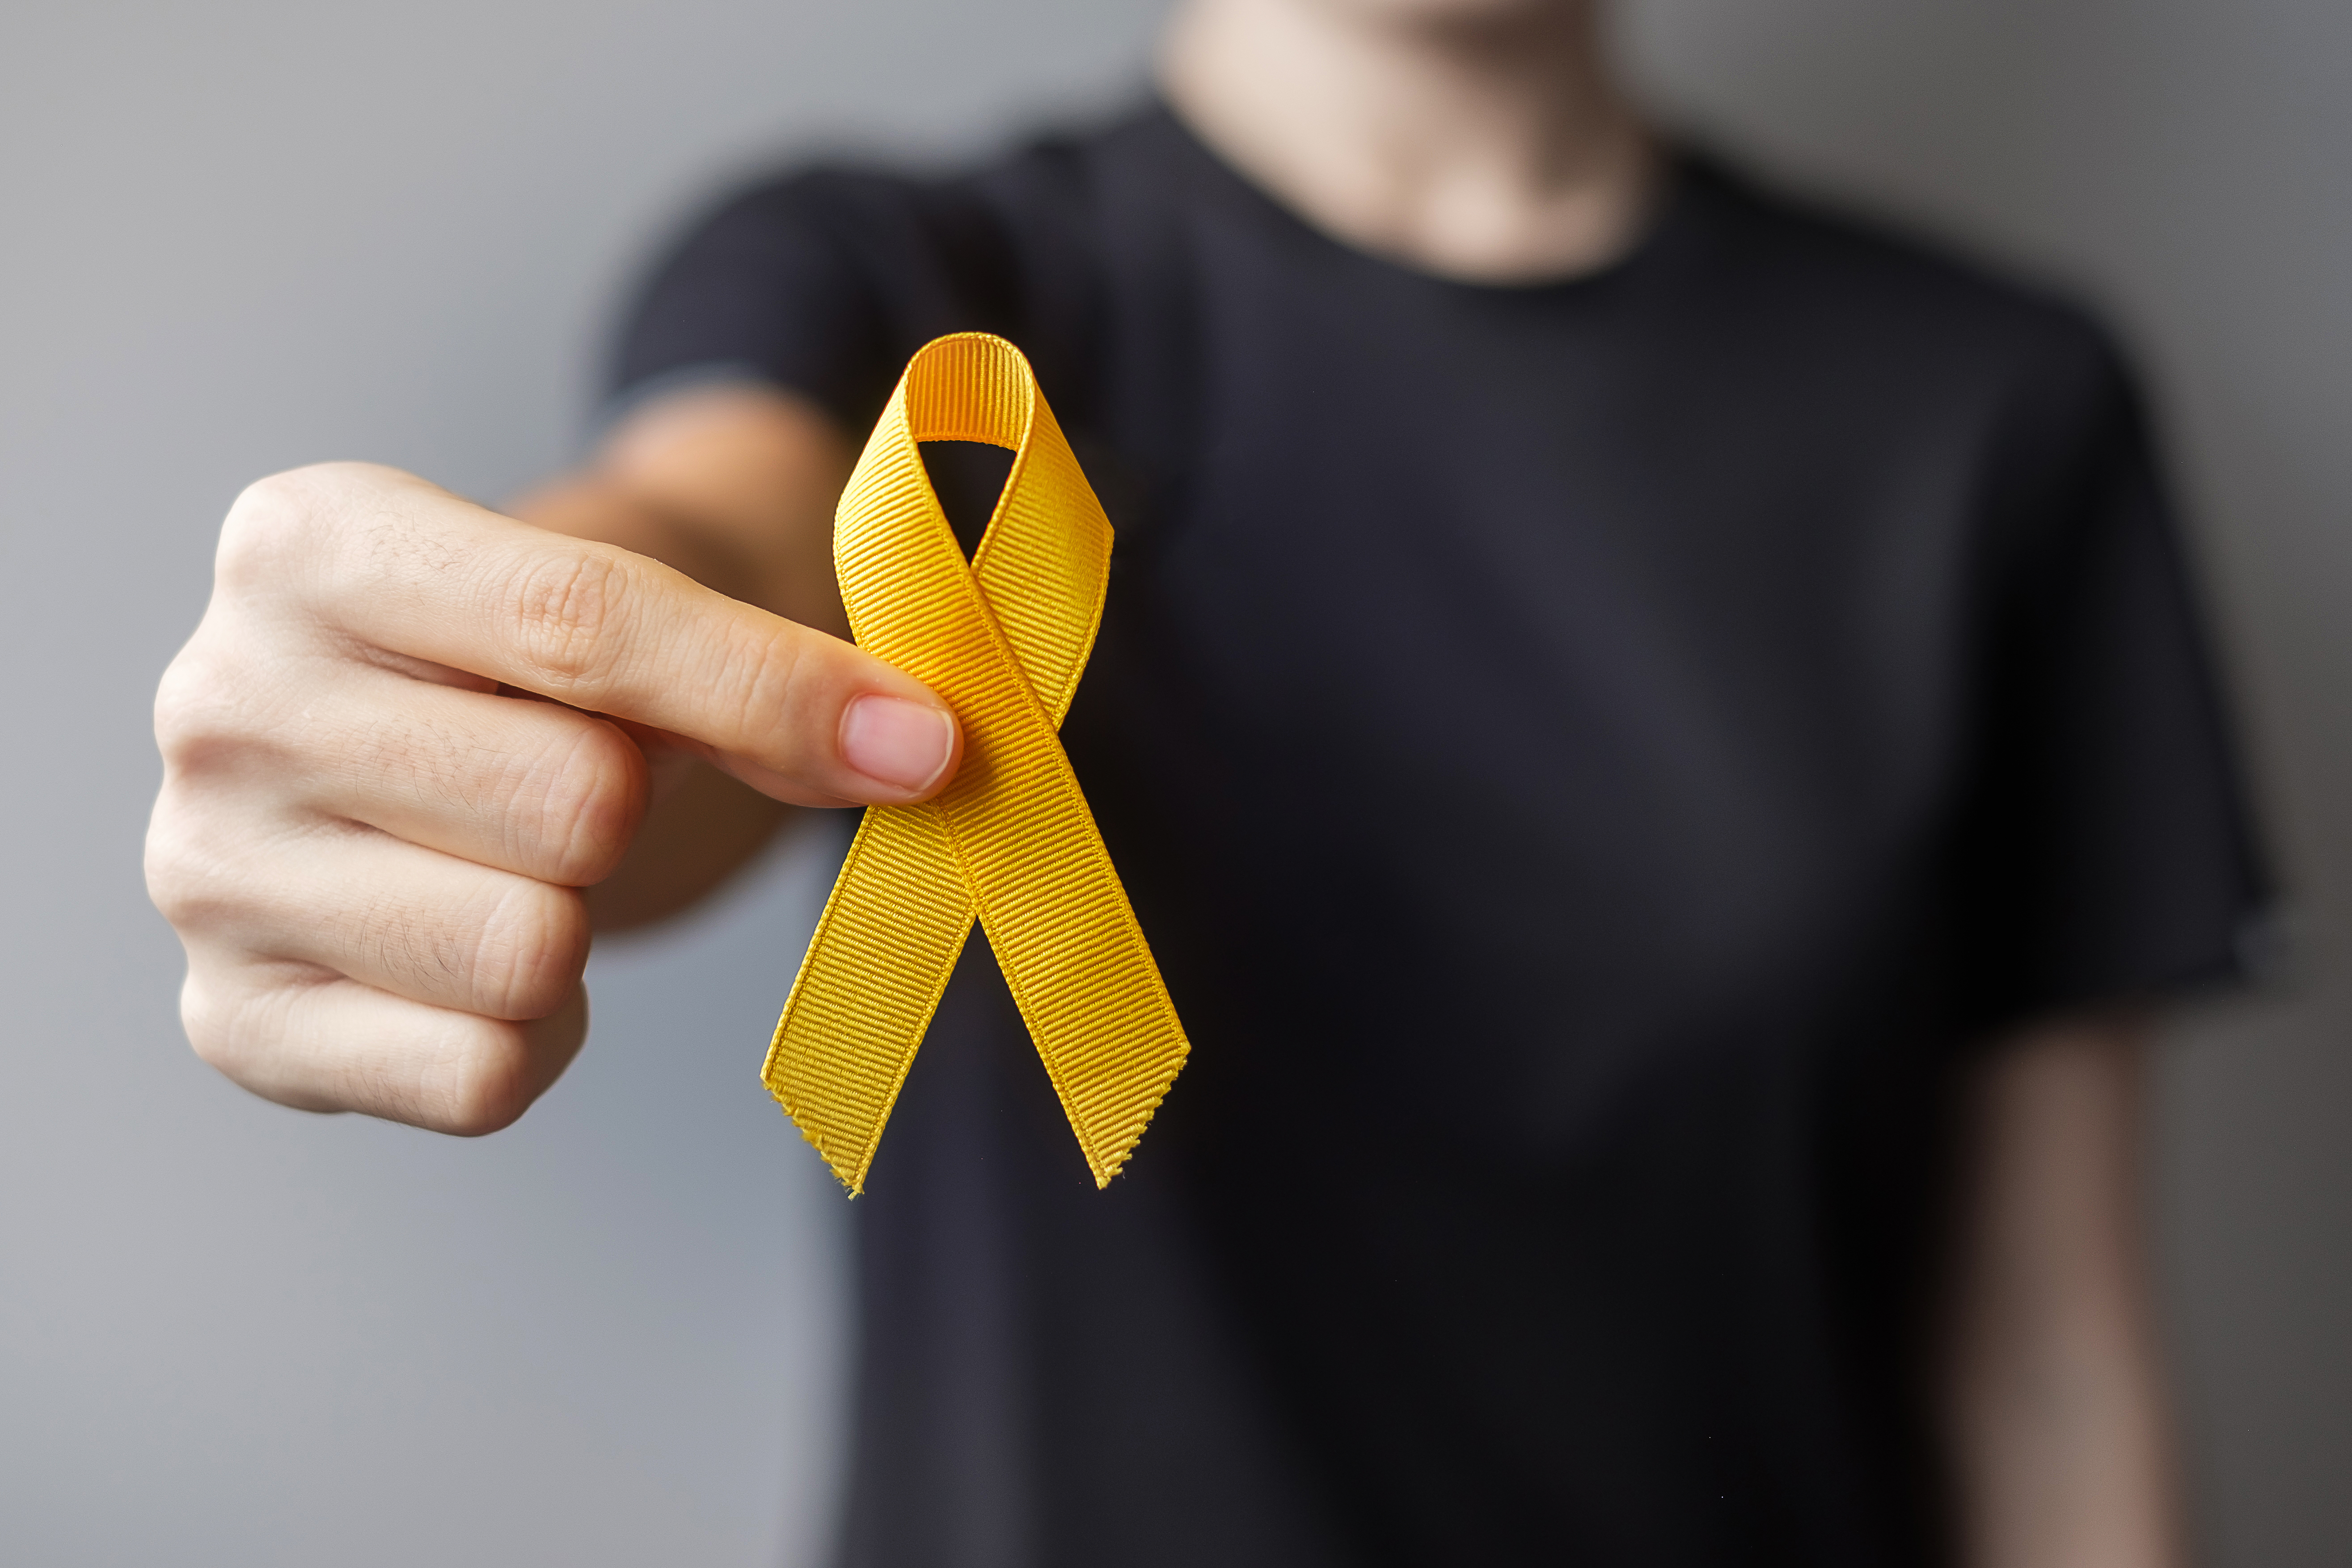 National Suicide Prevention Week: The Value Of Human Life